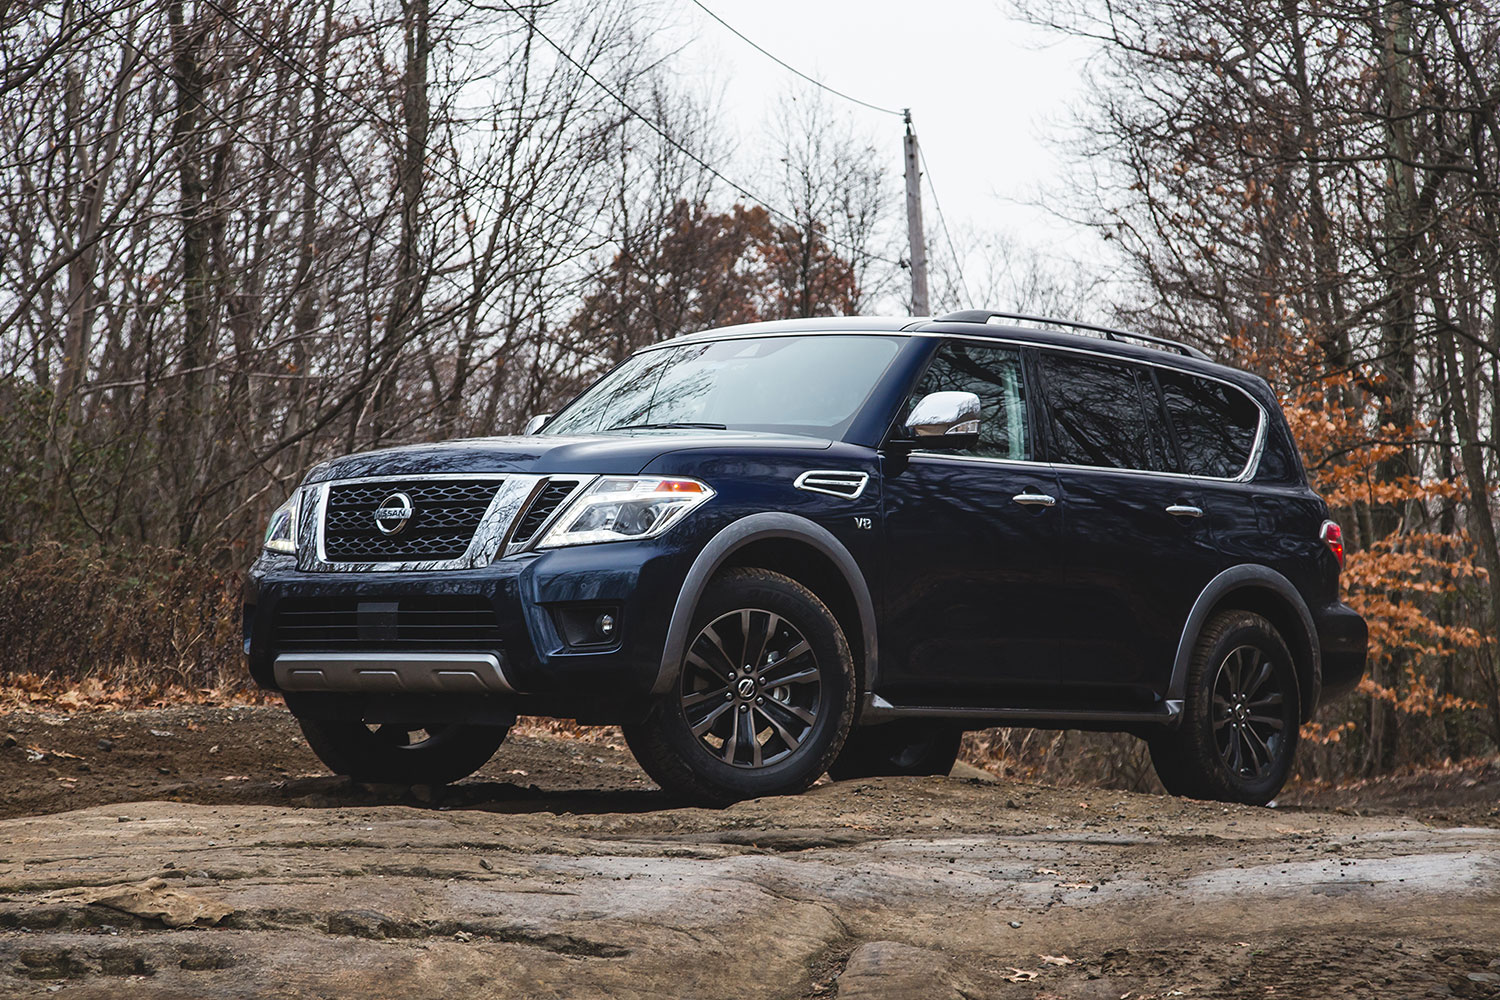 2020 Nissan Armada Review: What Buyers Need to Know